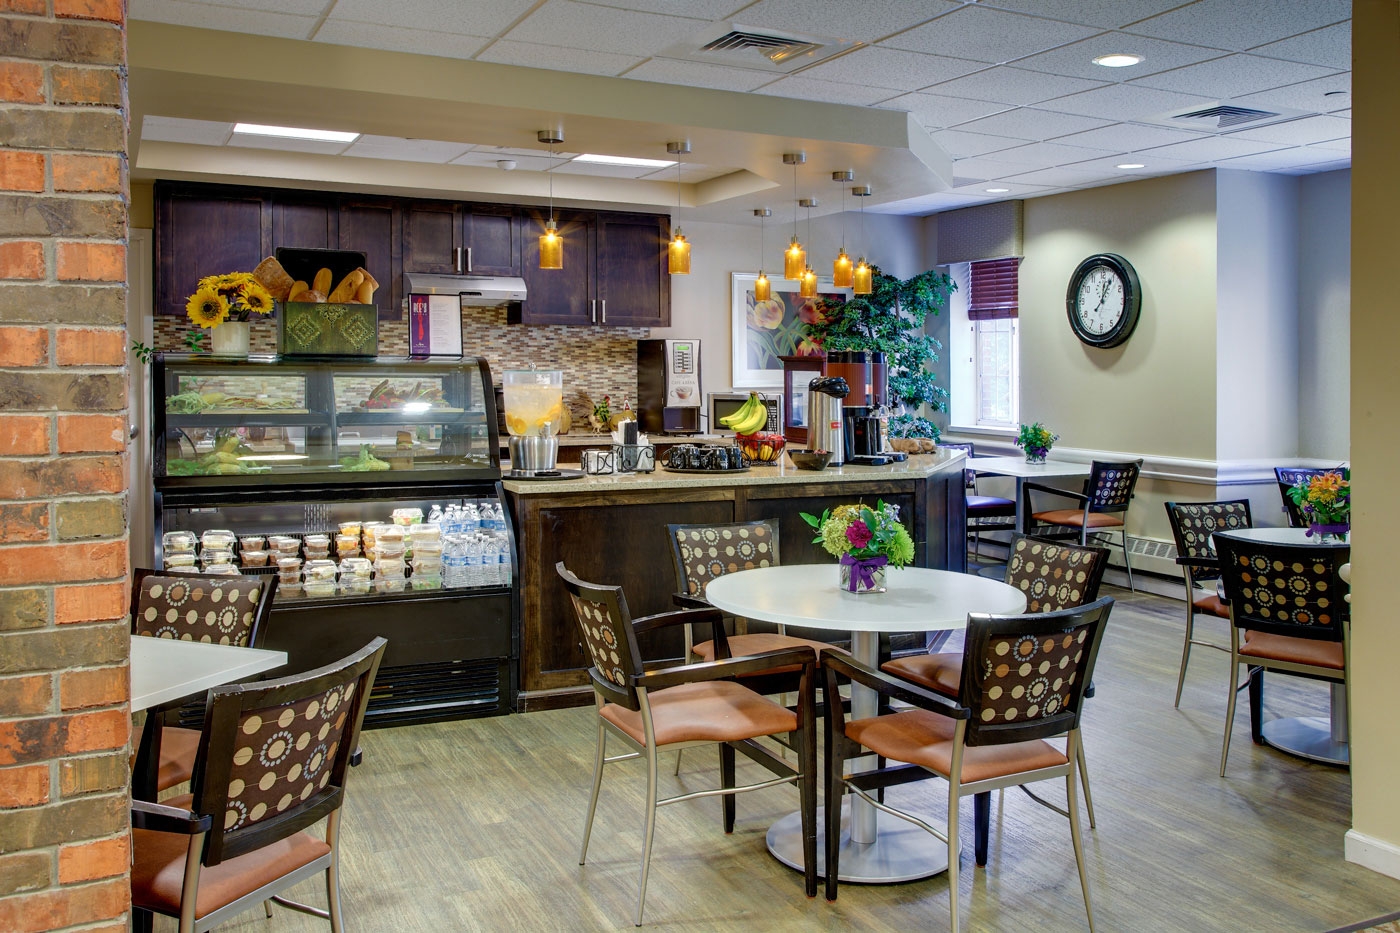 Our lively interior design for a cafe in a NY memory care community